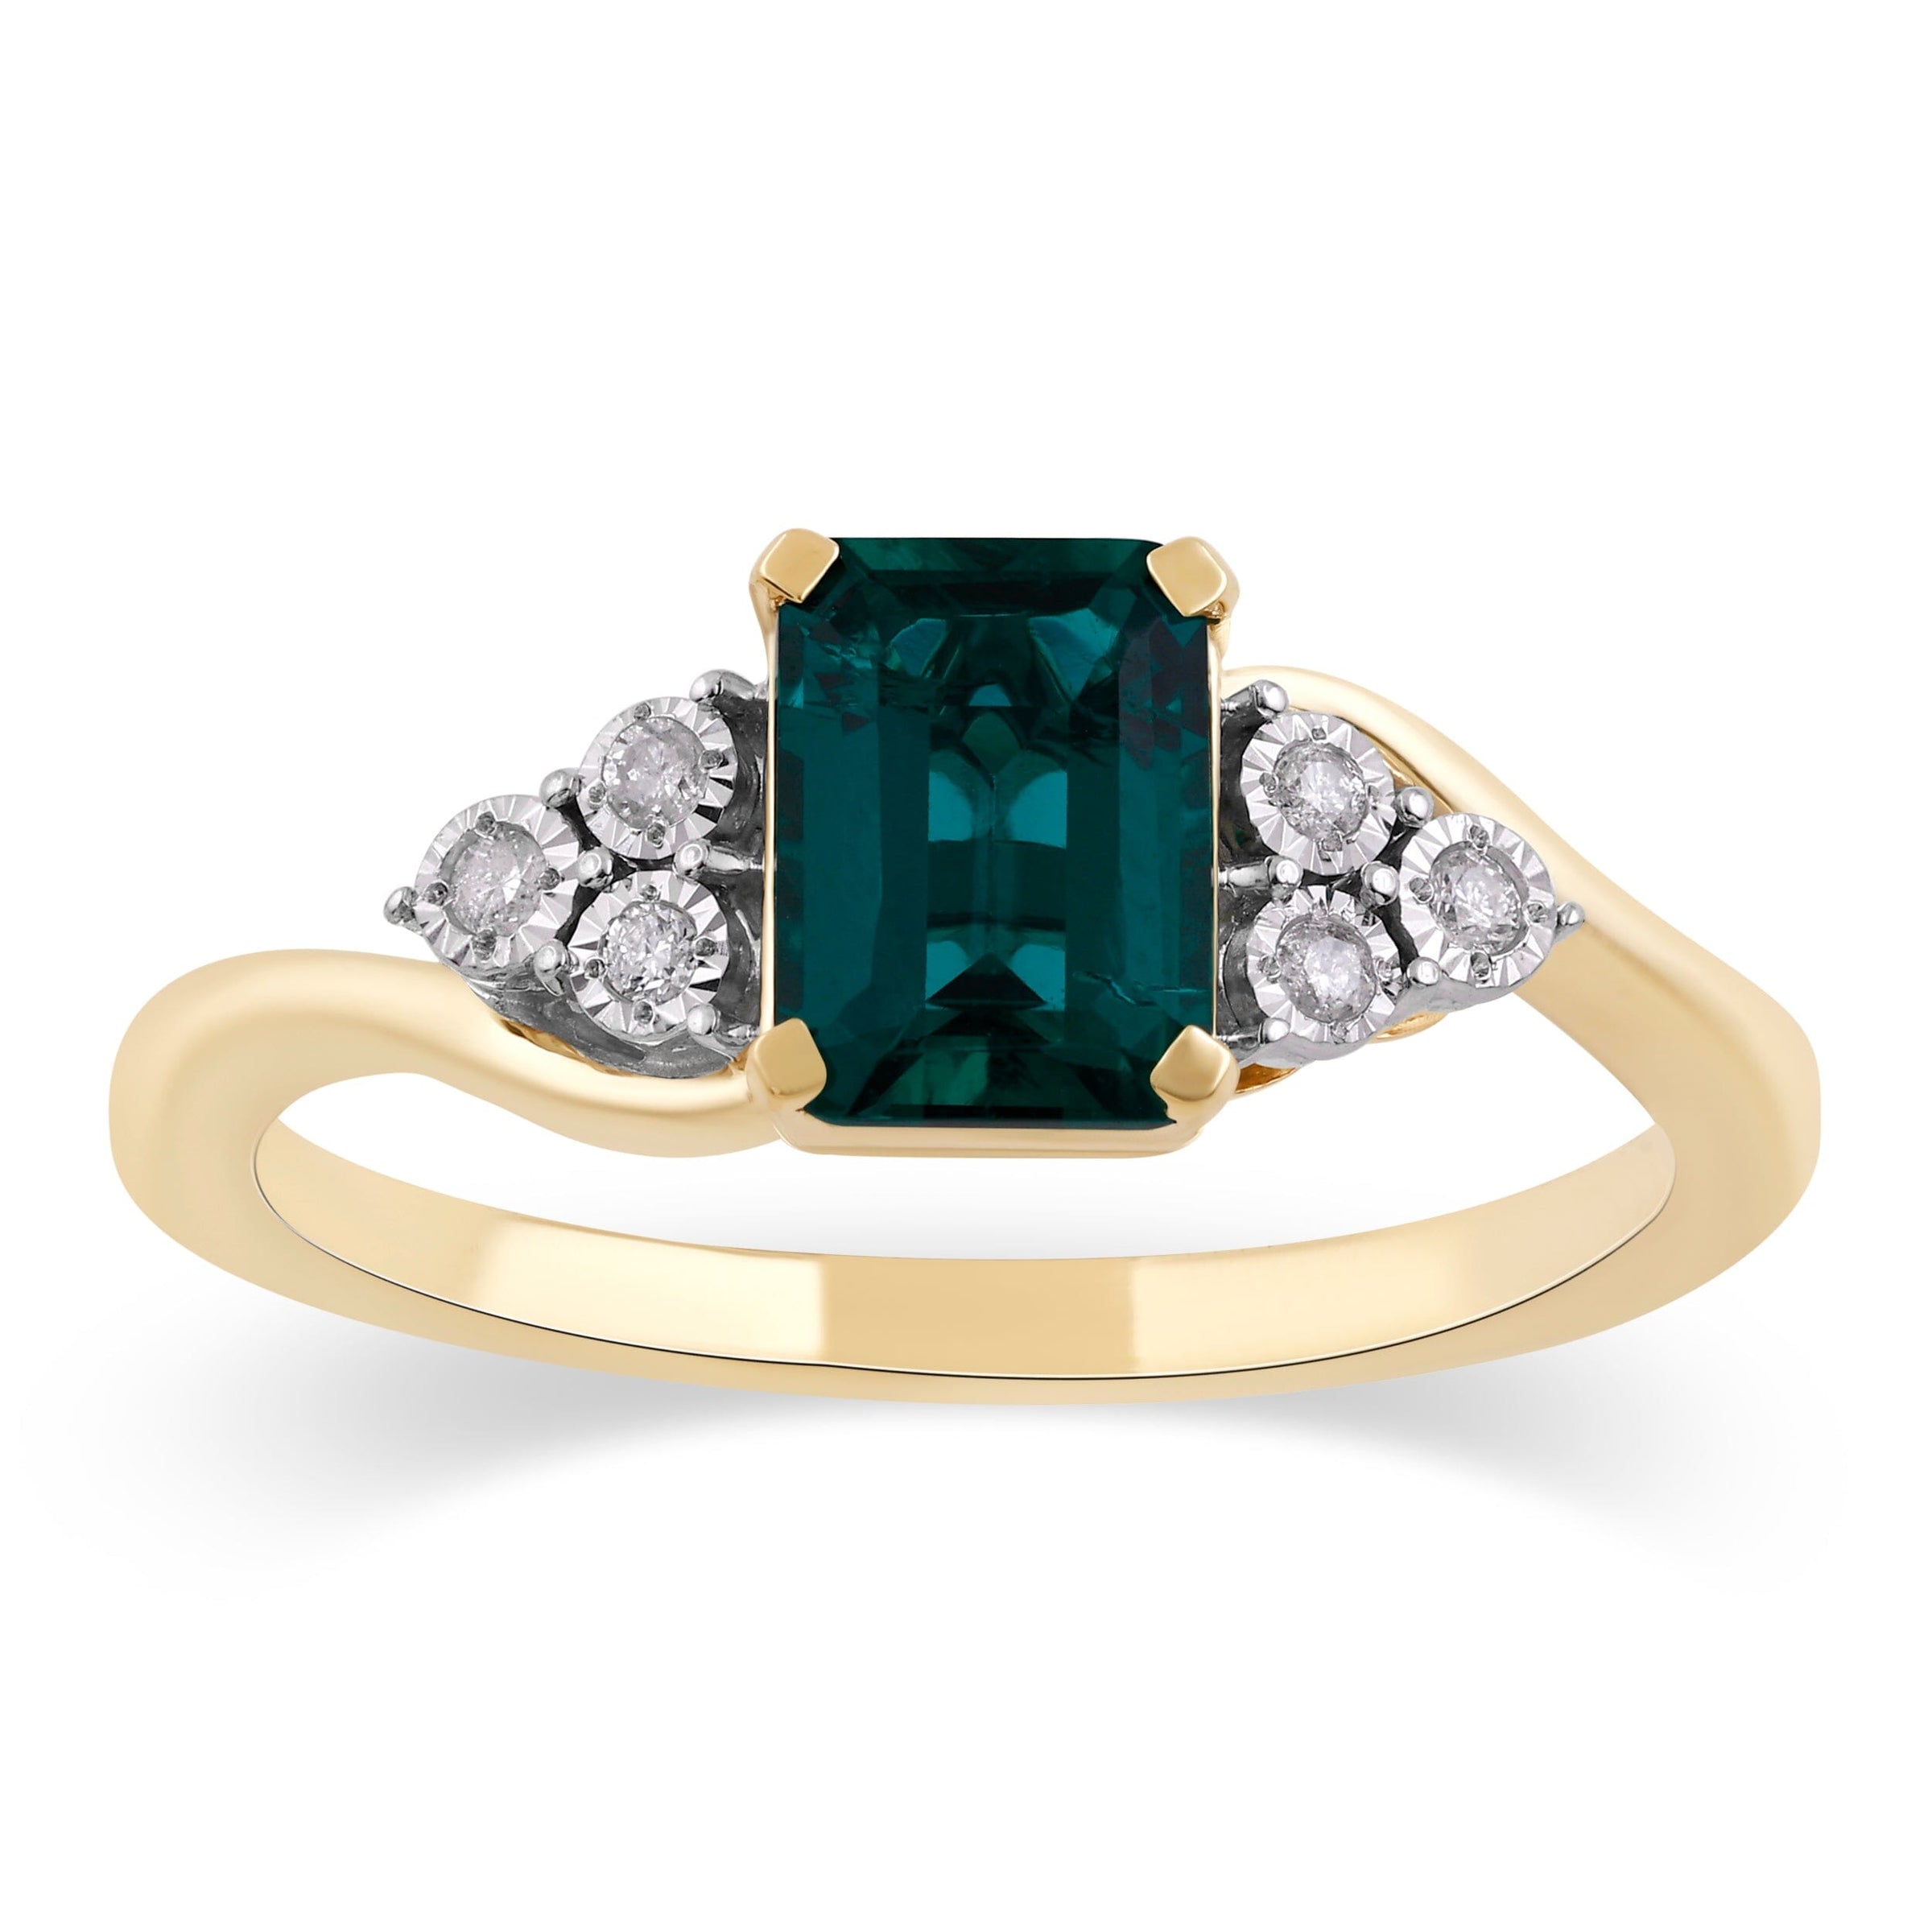 Emerald Cut Created Emerald Ring with 0.05ct of Diamonds in 9ct Yellow Gold Rings Bevilles 